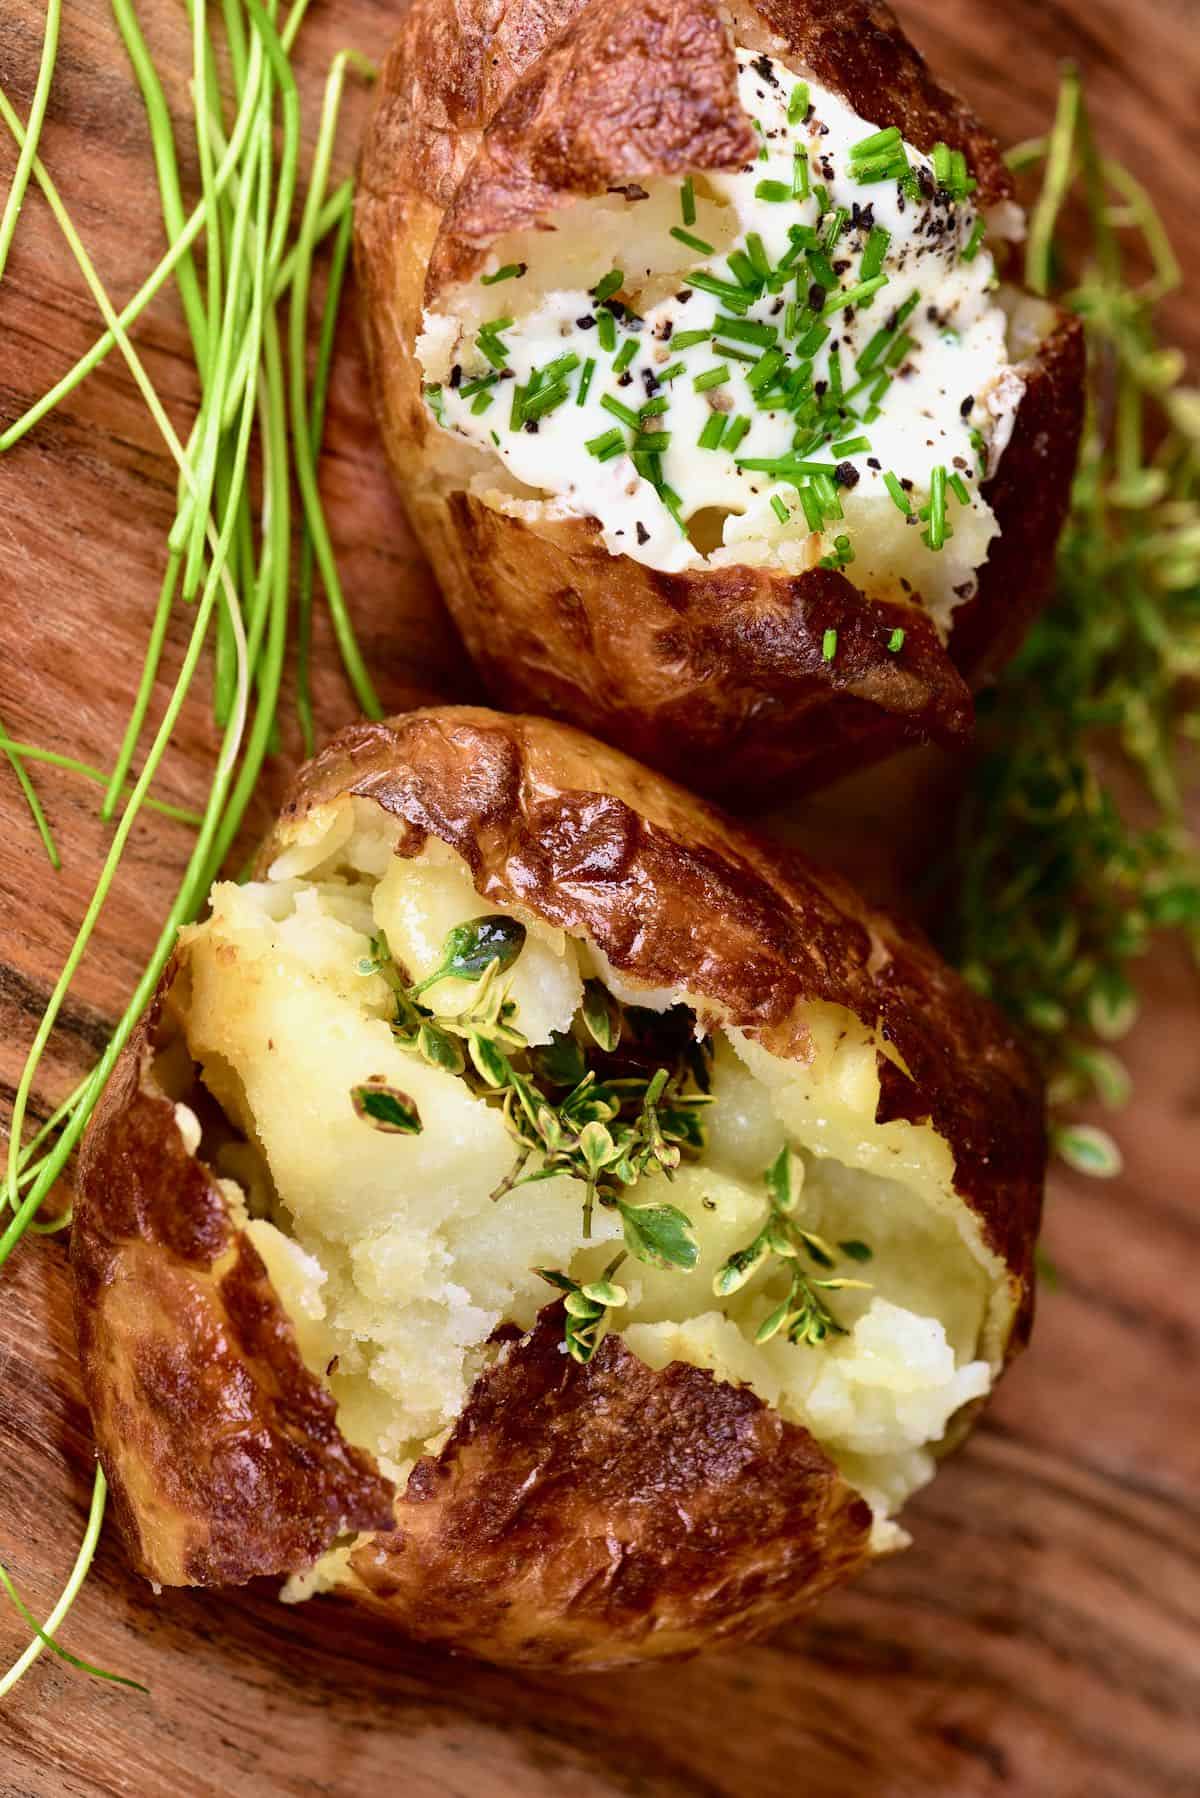 Two salt-baked potatoes topped with herbs and sour cream